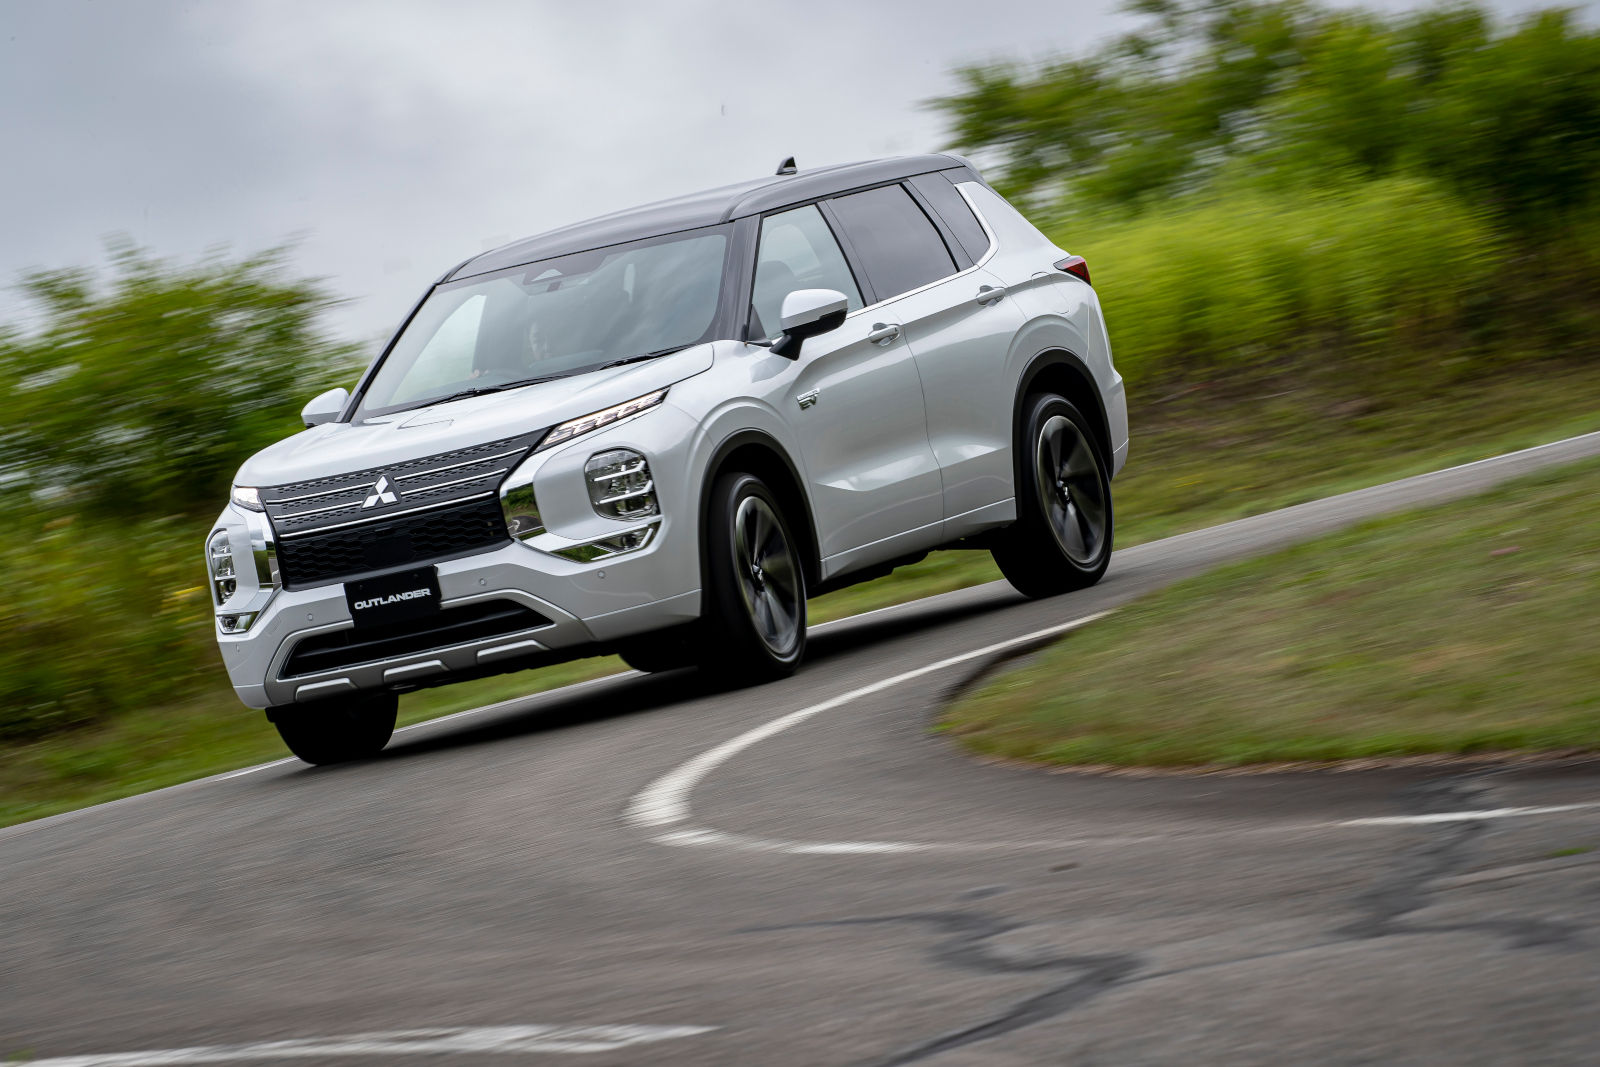 2023 Mitsubishi Outlander and 2023 Mitsubishi Outlander PHEV: Which one is right for you?